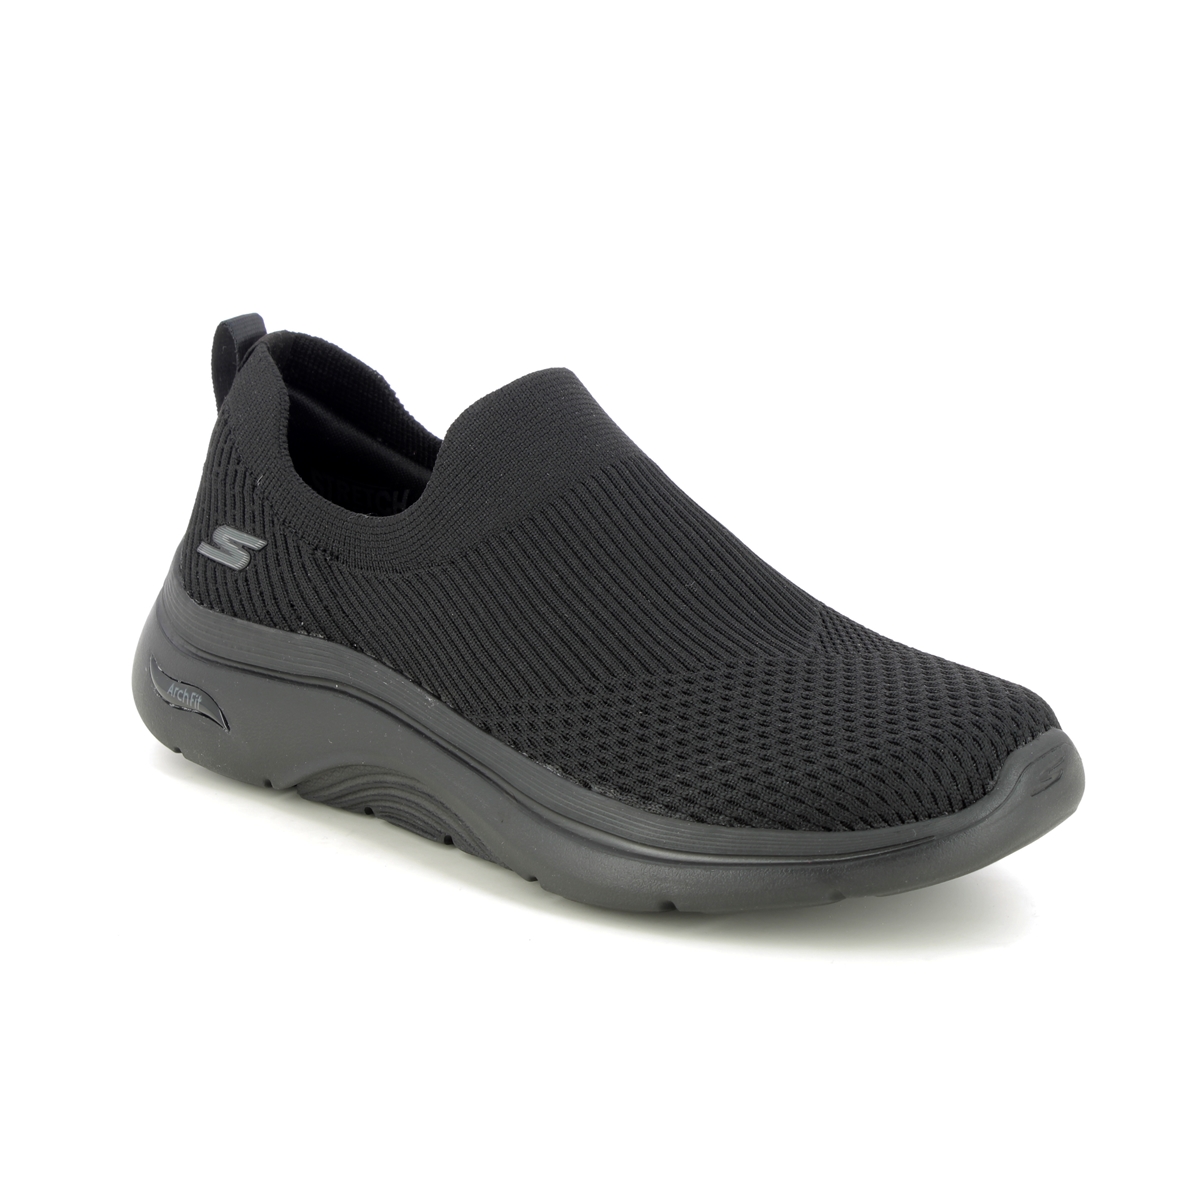 Skechers Arch Fit 2 Slip BBK Black Womens trainers 125300 in a Plain Textile in Size 8